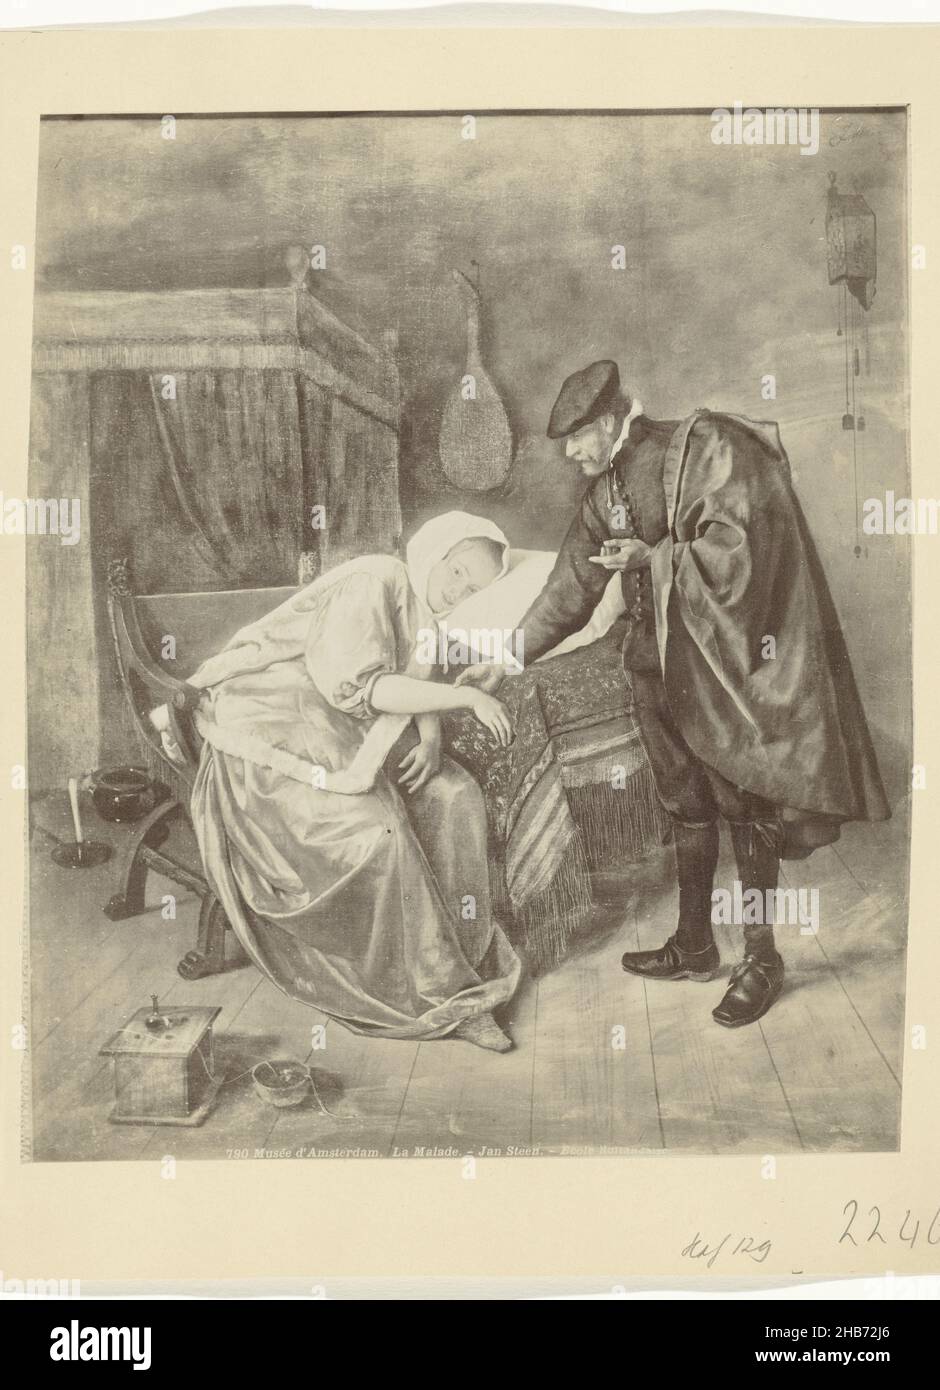 Photoreproduction of the painting The Sick Woman by Jan Steen, Musée d'Amsterdam. La Malade. - Jan van Steen. - Ecole hollandaise (title on object), anonymous, after: Jan Havicksz. Steen (mentioned on object), Amsterdam, publisher: Paris, 1867 - 1880, paper, cardboard, albumen print, height 265 mm × width 223 mmheight 314 mm × width 262 mm Stock Photo